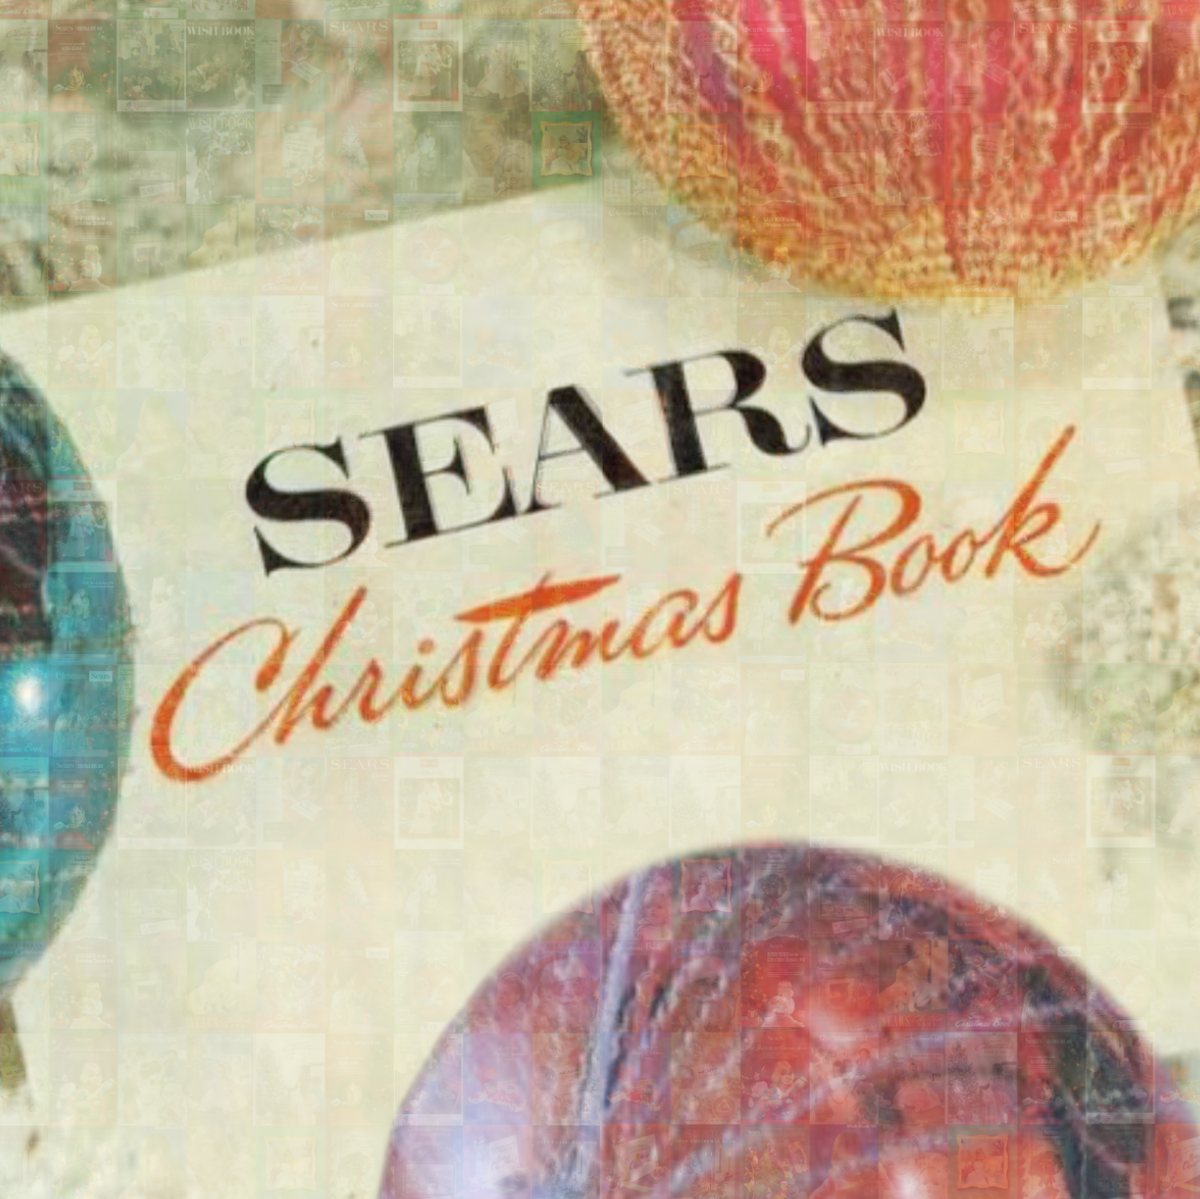 Back in the day: Long before , families had the Sears-Roebuck catalog